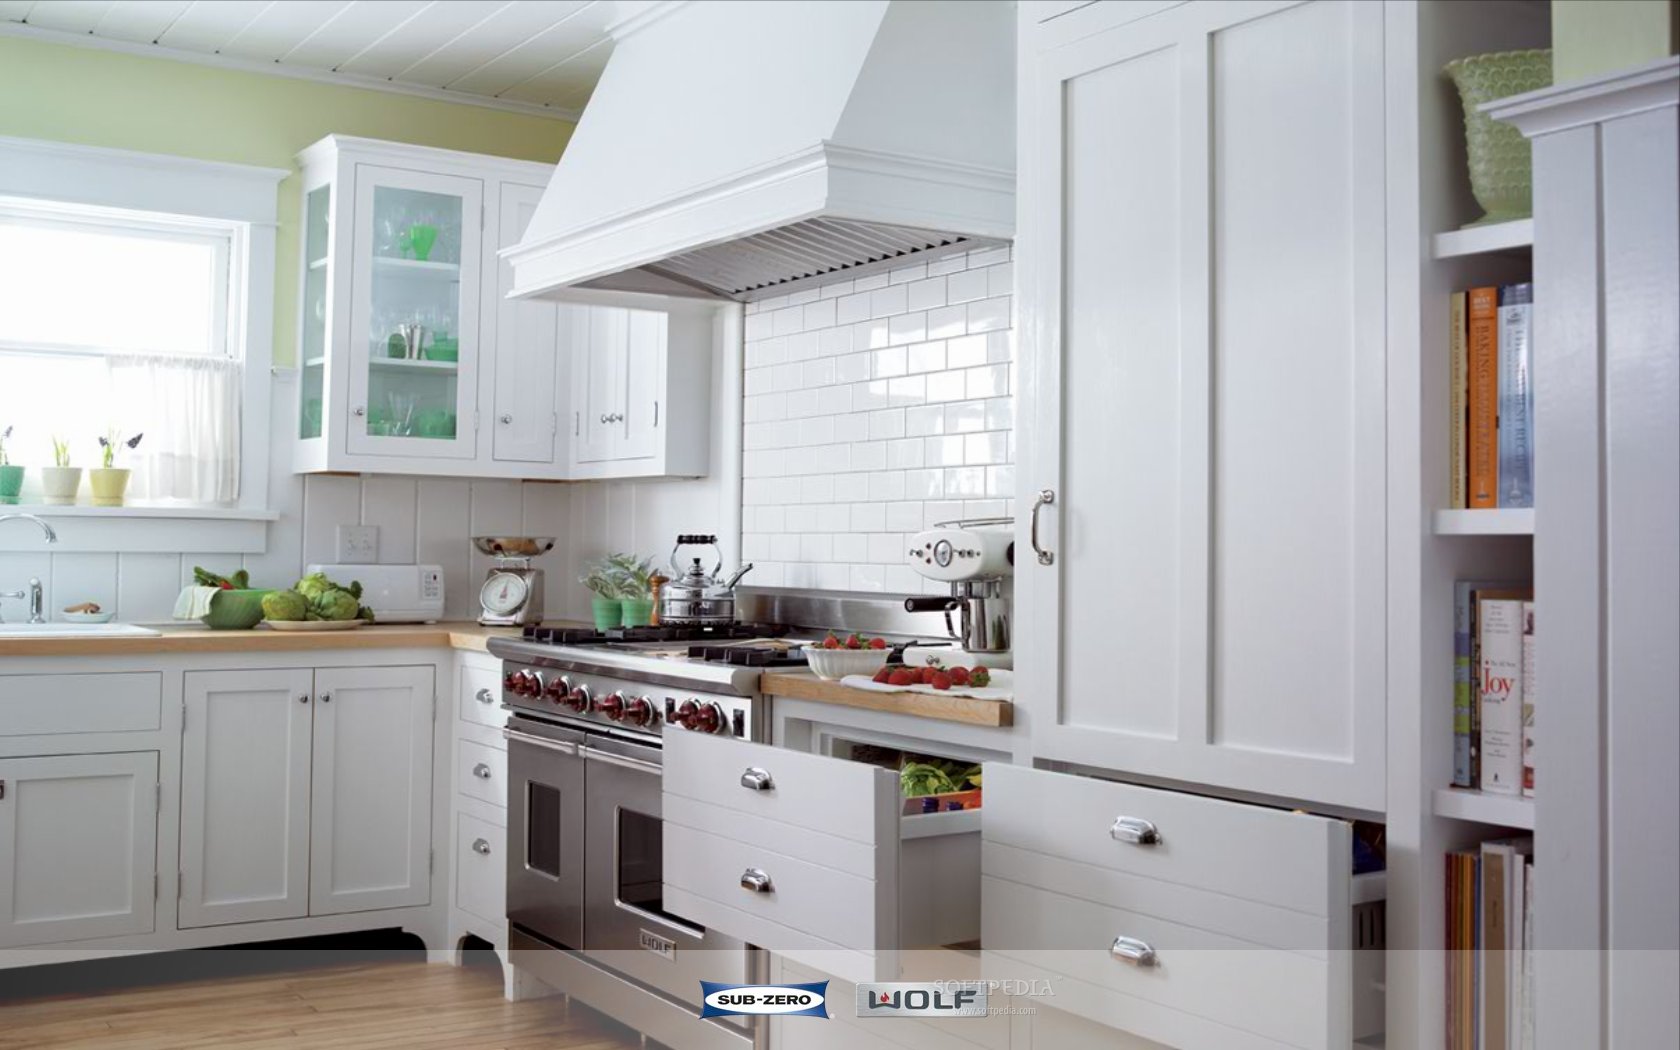 How To Remodel Kitchen Cabinets